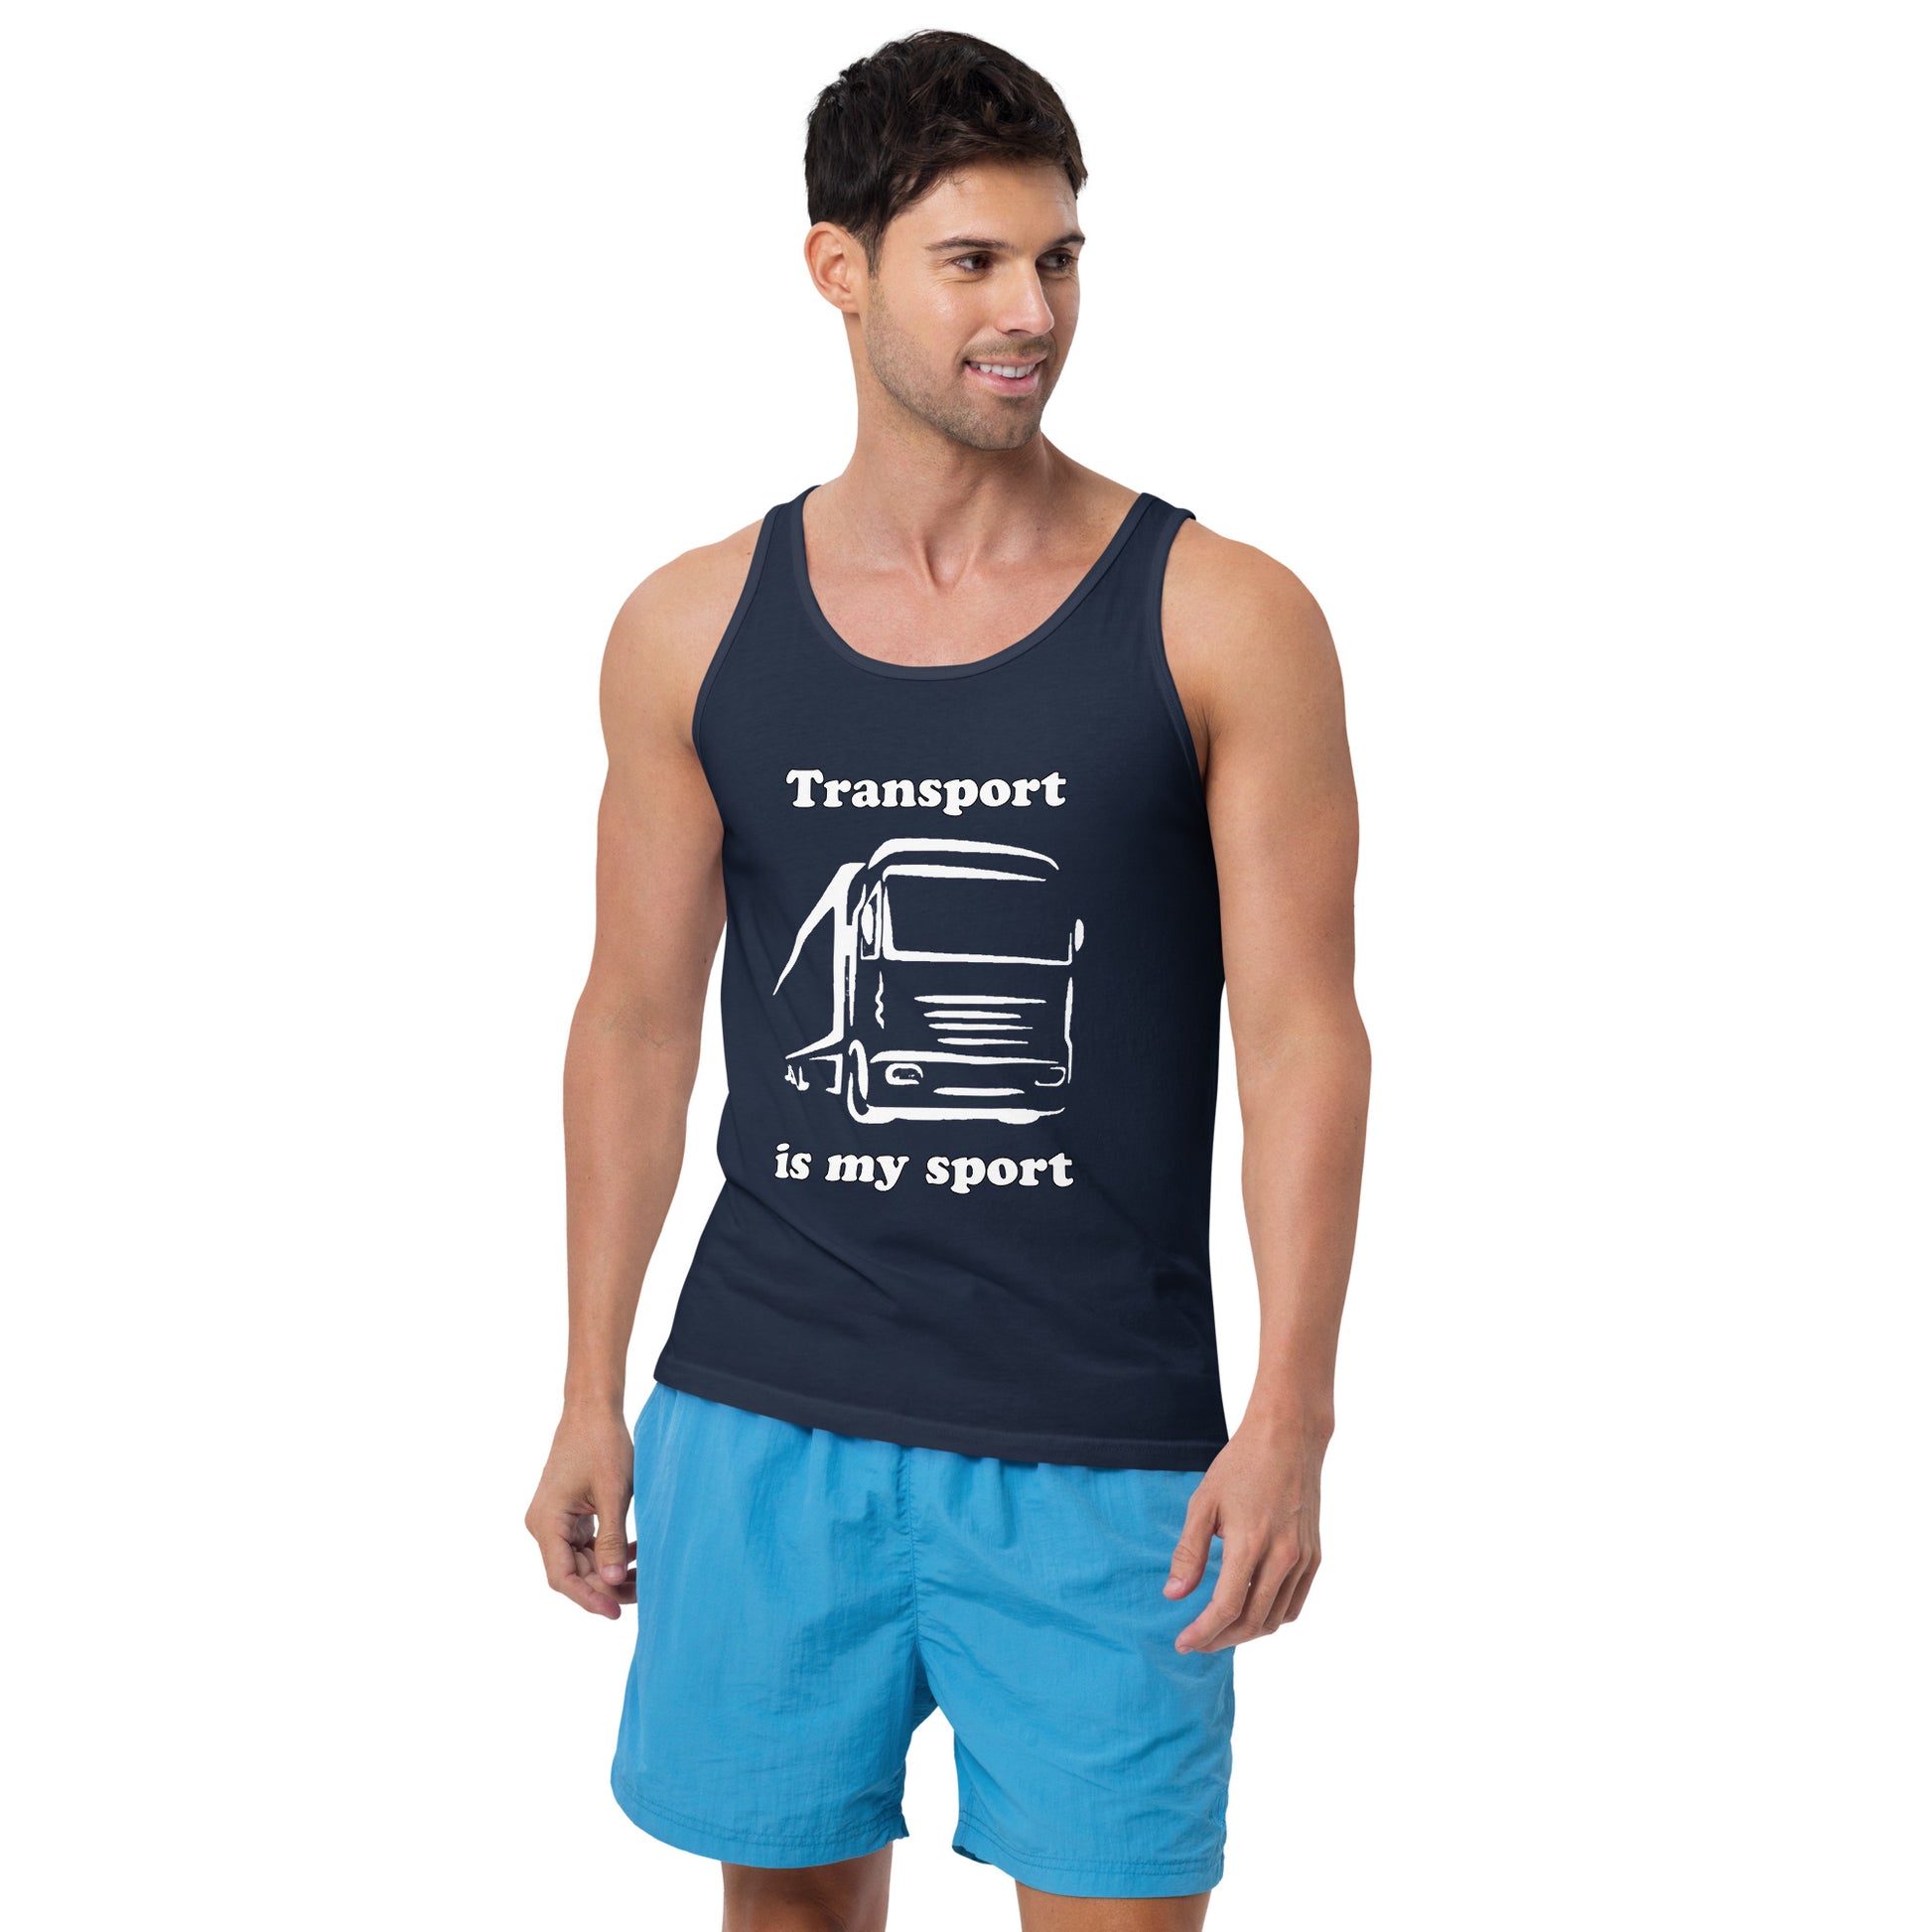 Man with navy blue tank top with picture of truck and text "Transport is my sport"